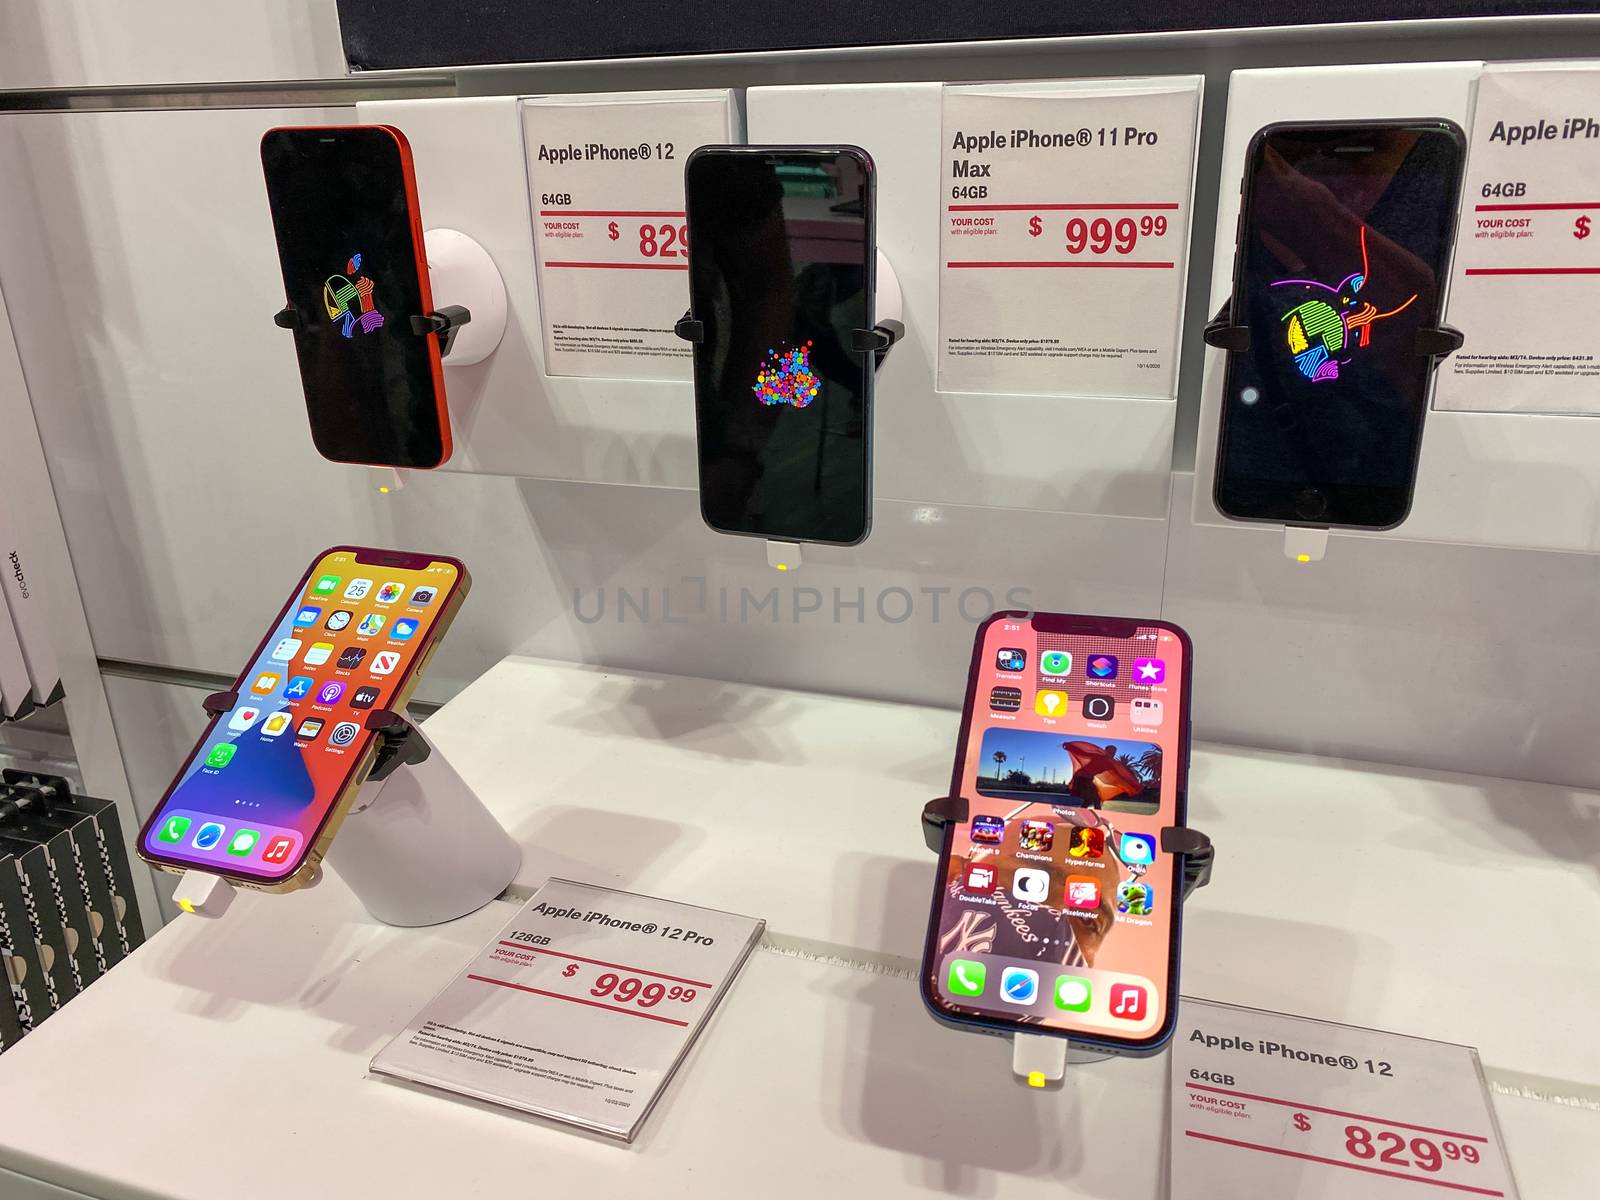 The new Apple iPhone 12 and 12 Pro on display at the T Mobile st by Jshanebutt